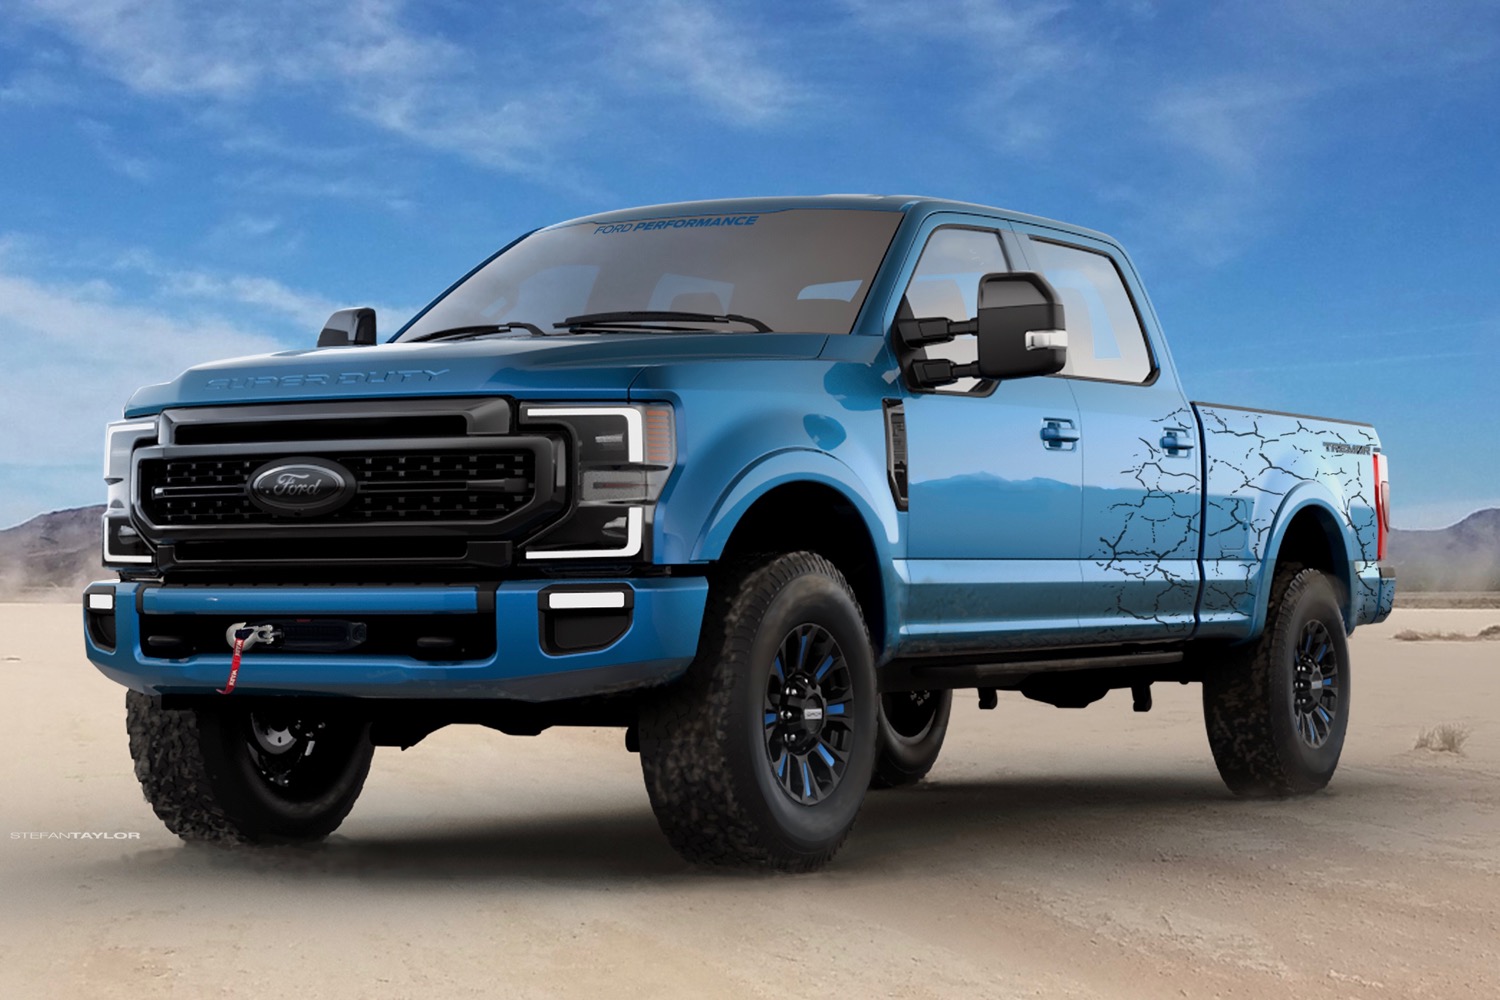 2020 ford f series super duty at sema 2019 accessories 250 tremor crew cab with black appearance package